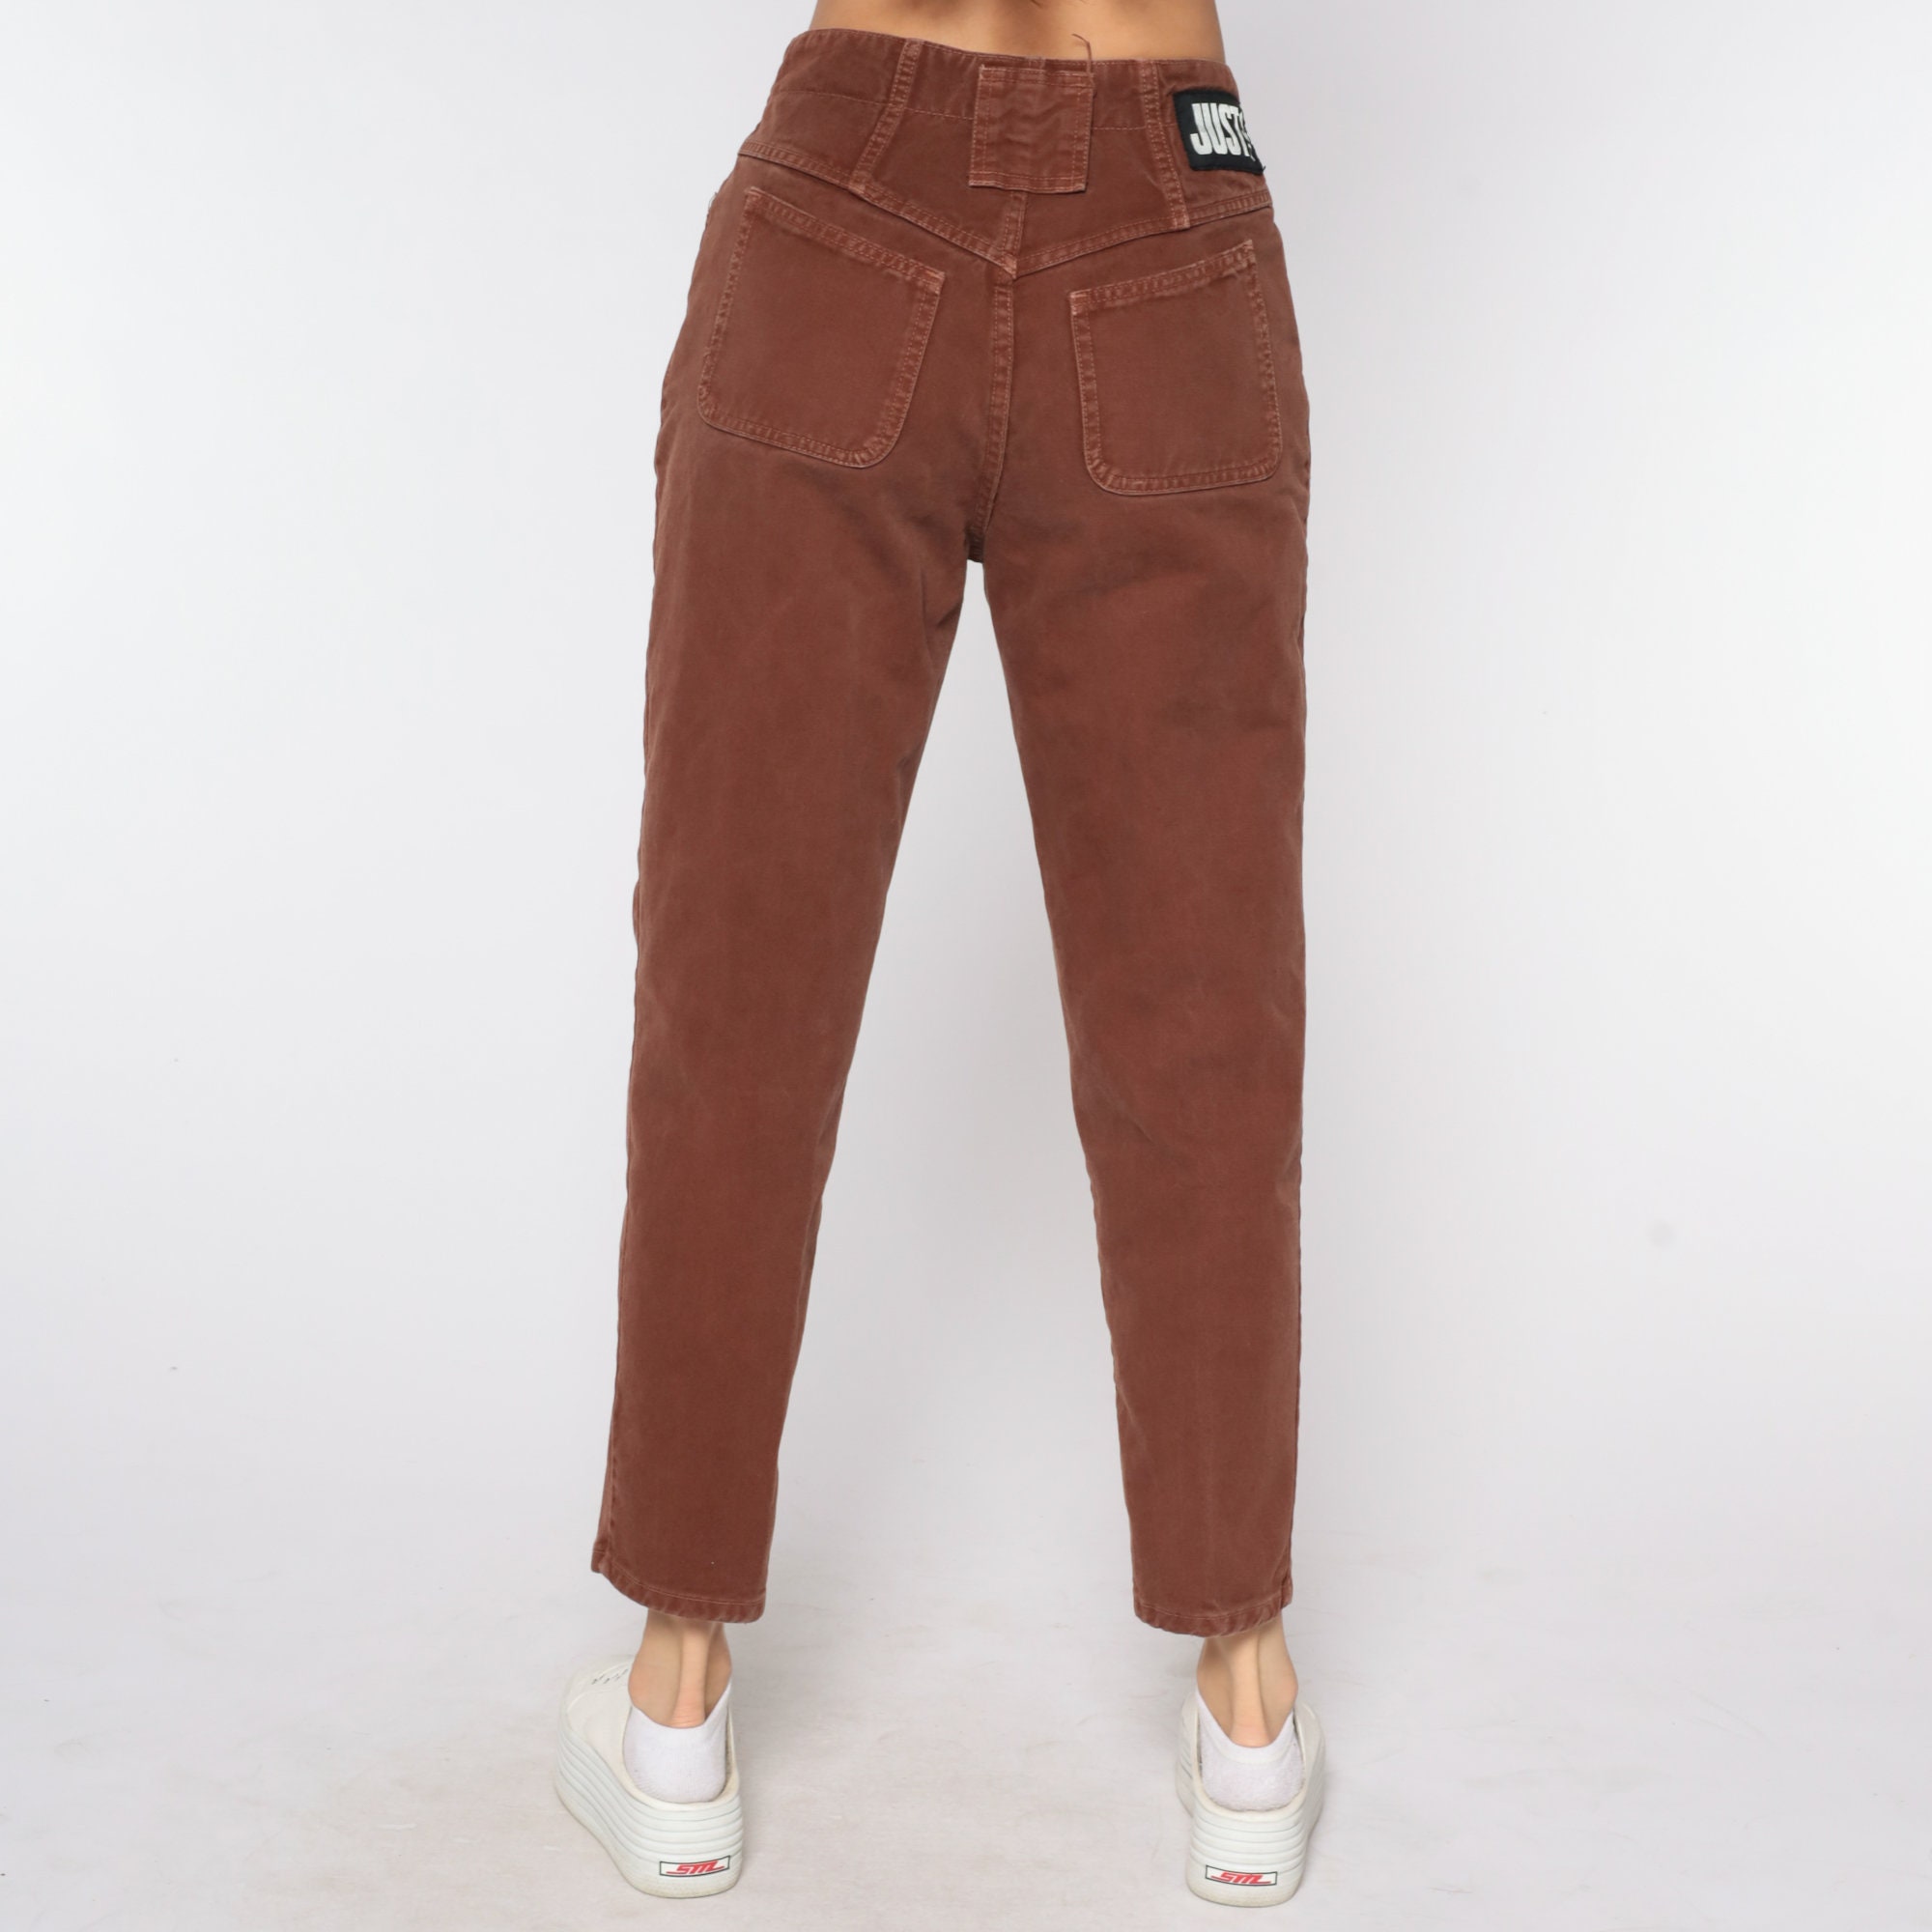 Buy Brown Mom Jeans Colored Jeans 90s Jeans Color High Waist Jeans